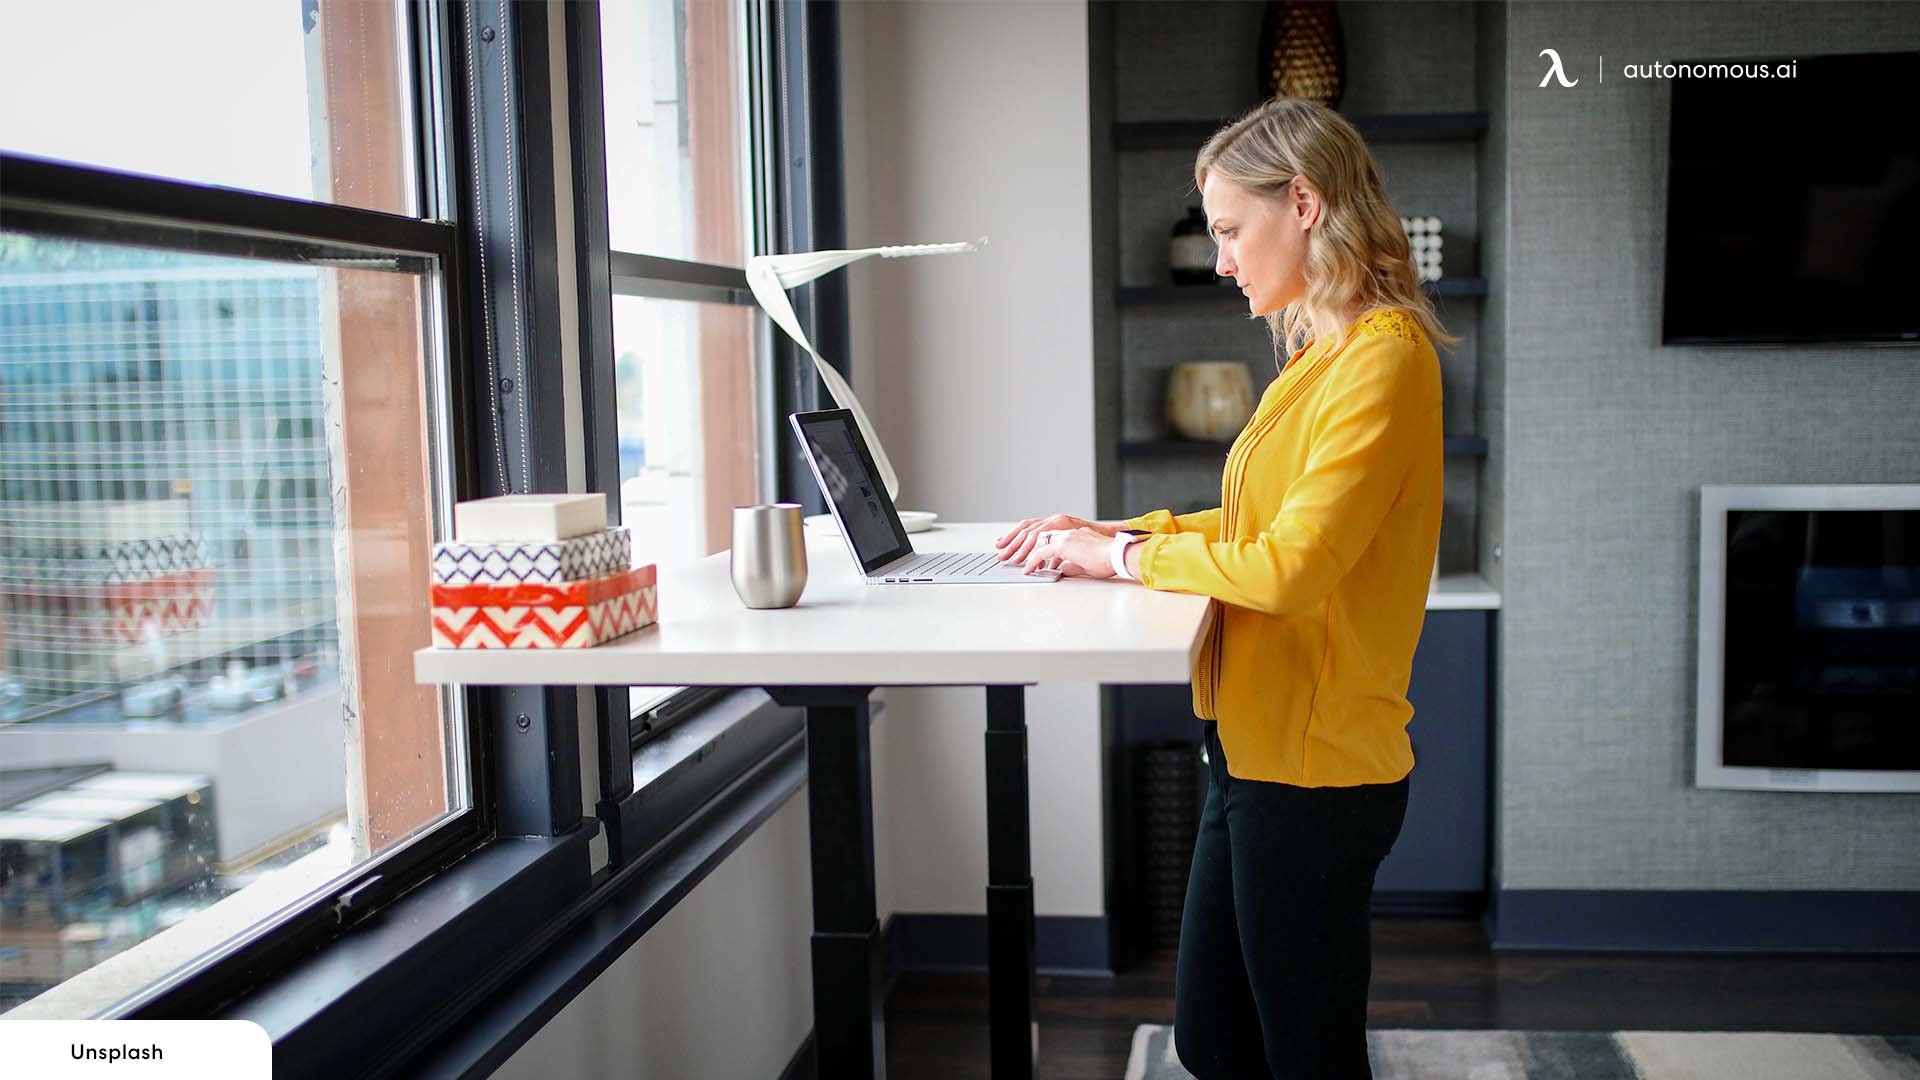 DIY Adjustable Desk Riser You Can Do This Weekend